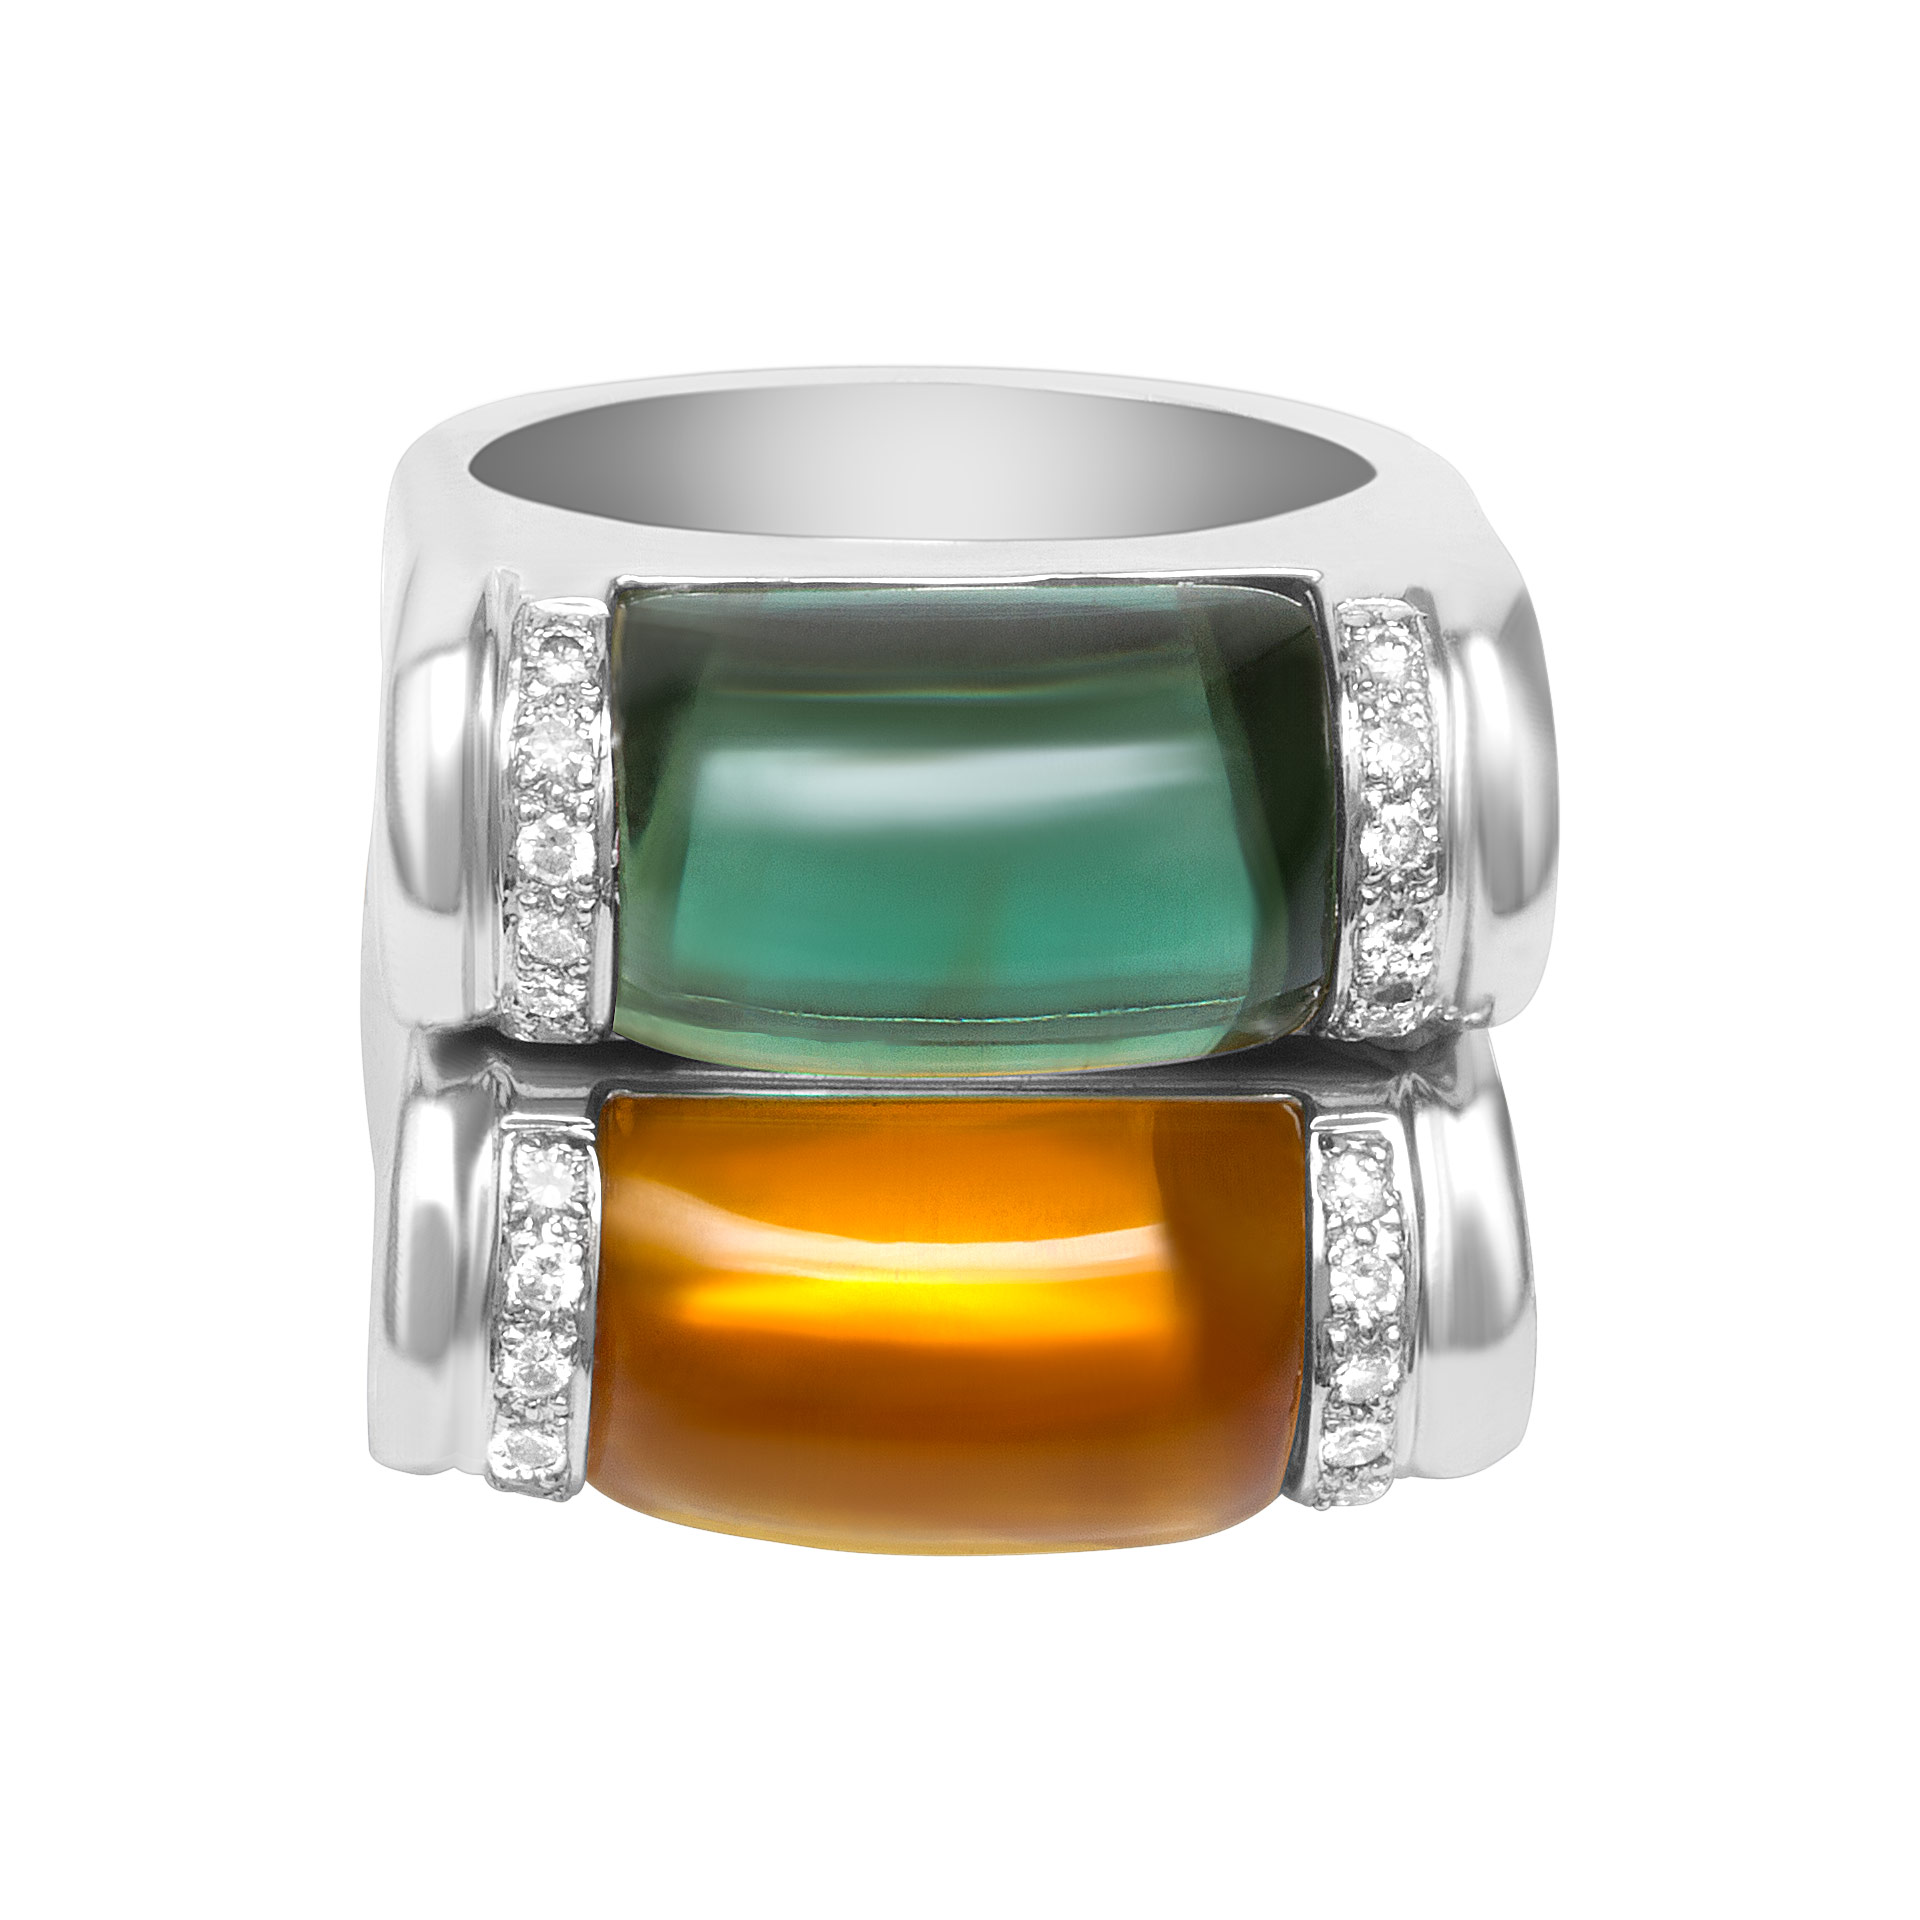 Stackable citrine and tourmaline set of 2 rings with diamond accents in 18k white gold.